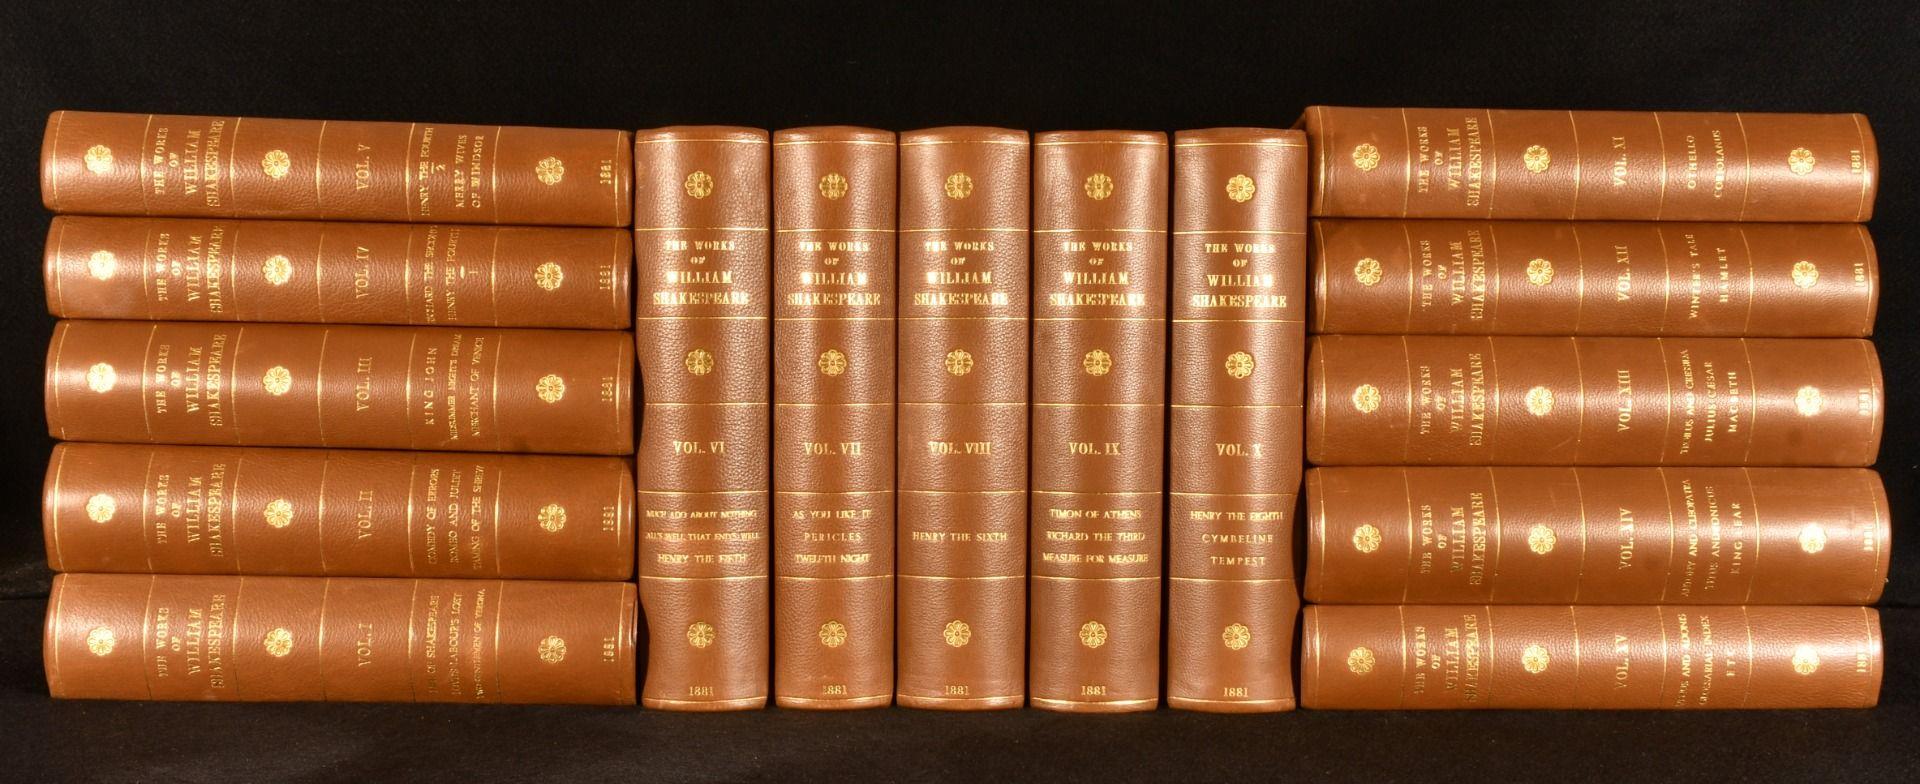 A superb limited edition set of the collected works of William Shakespeare, illustrated throughout by Sir John Gilbert.

The collected works of William Shakespeare.

A limited edition set, limited to a total of one thousand copies of this Edition de